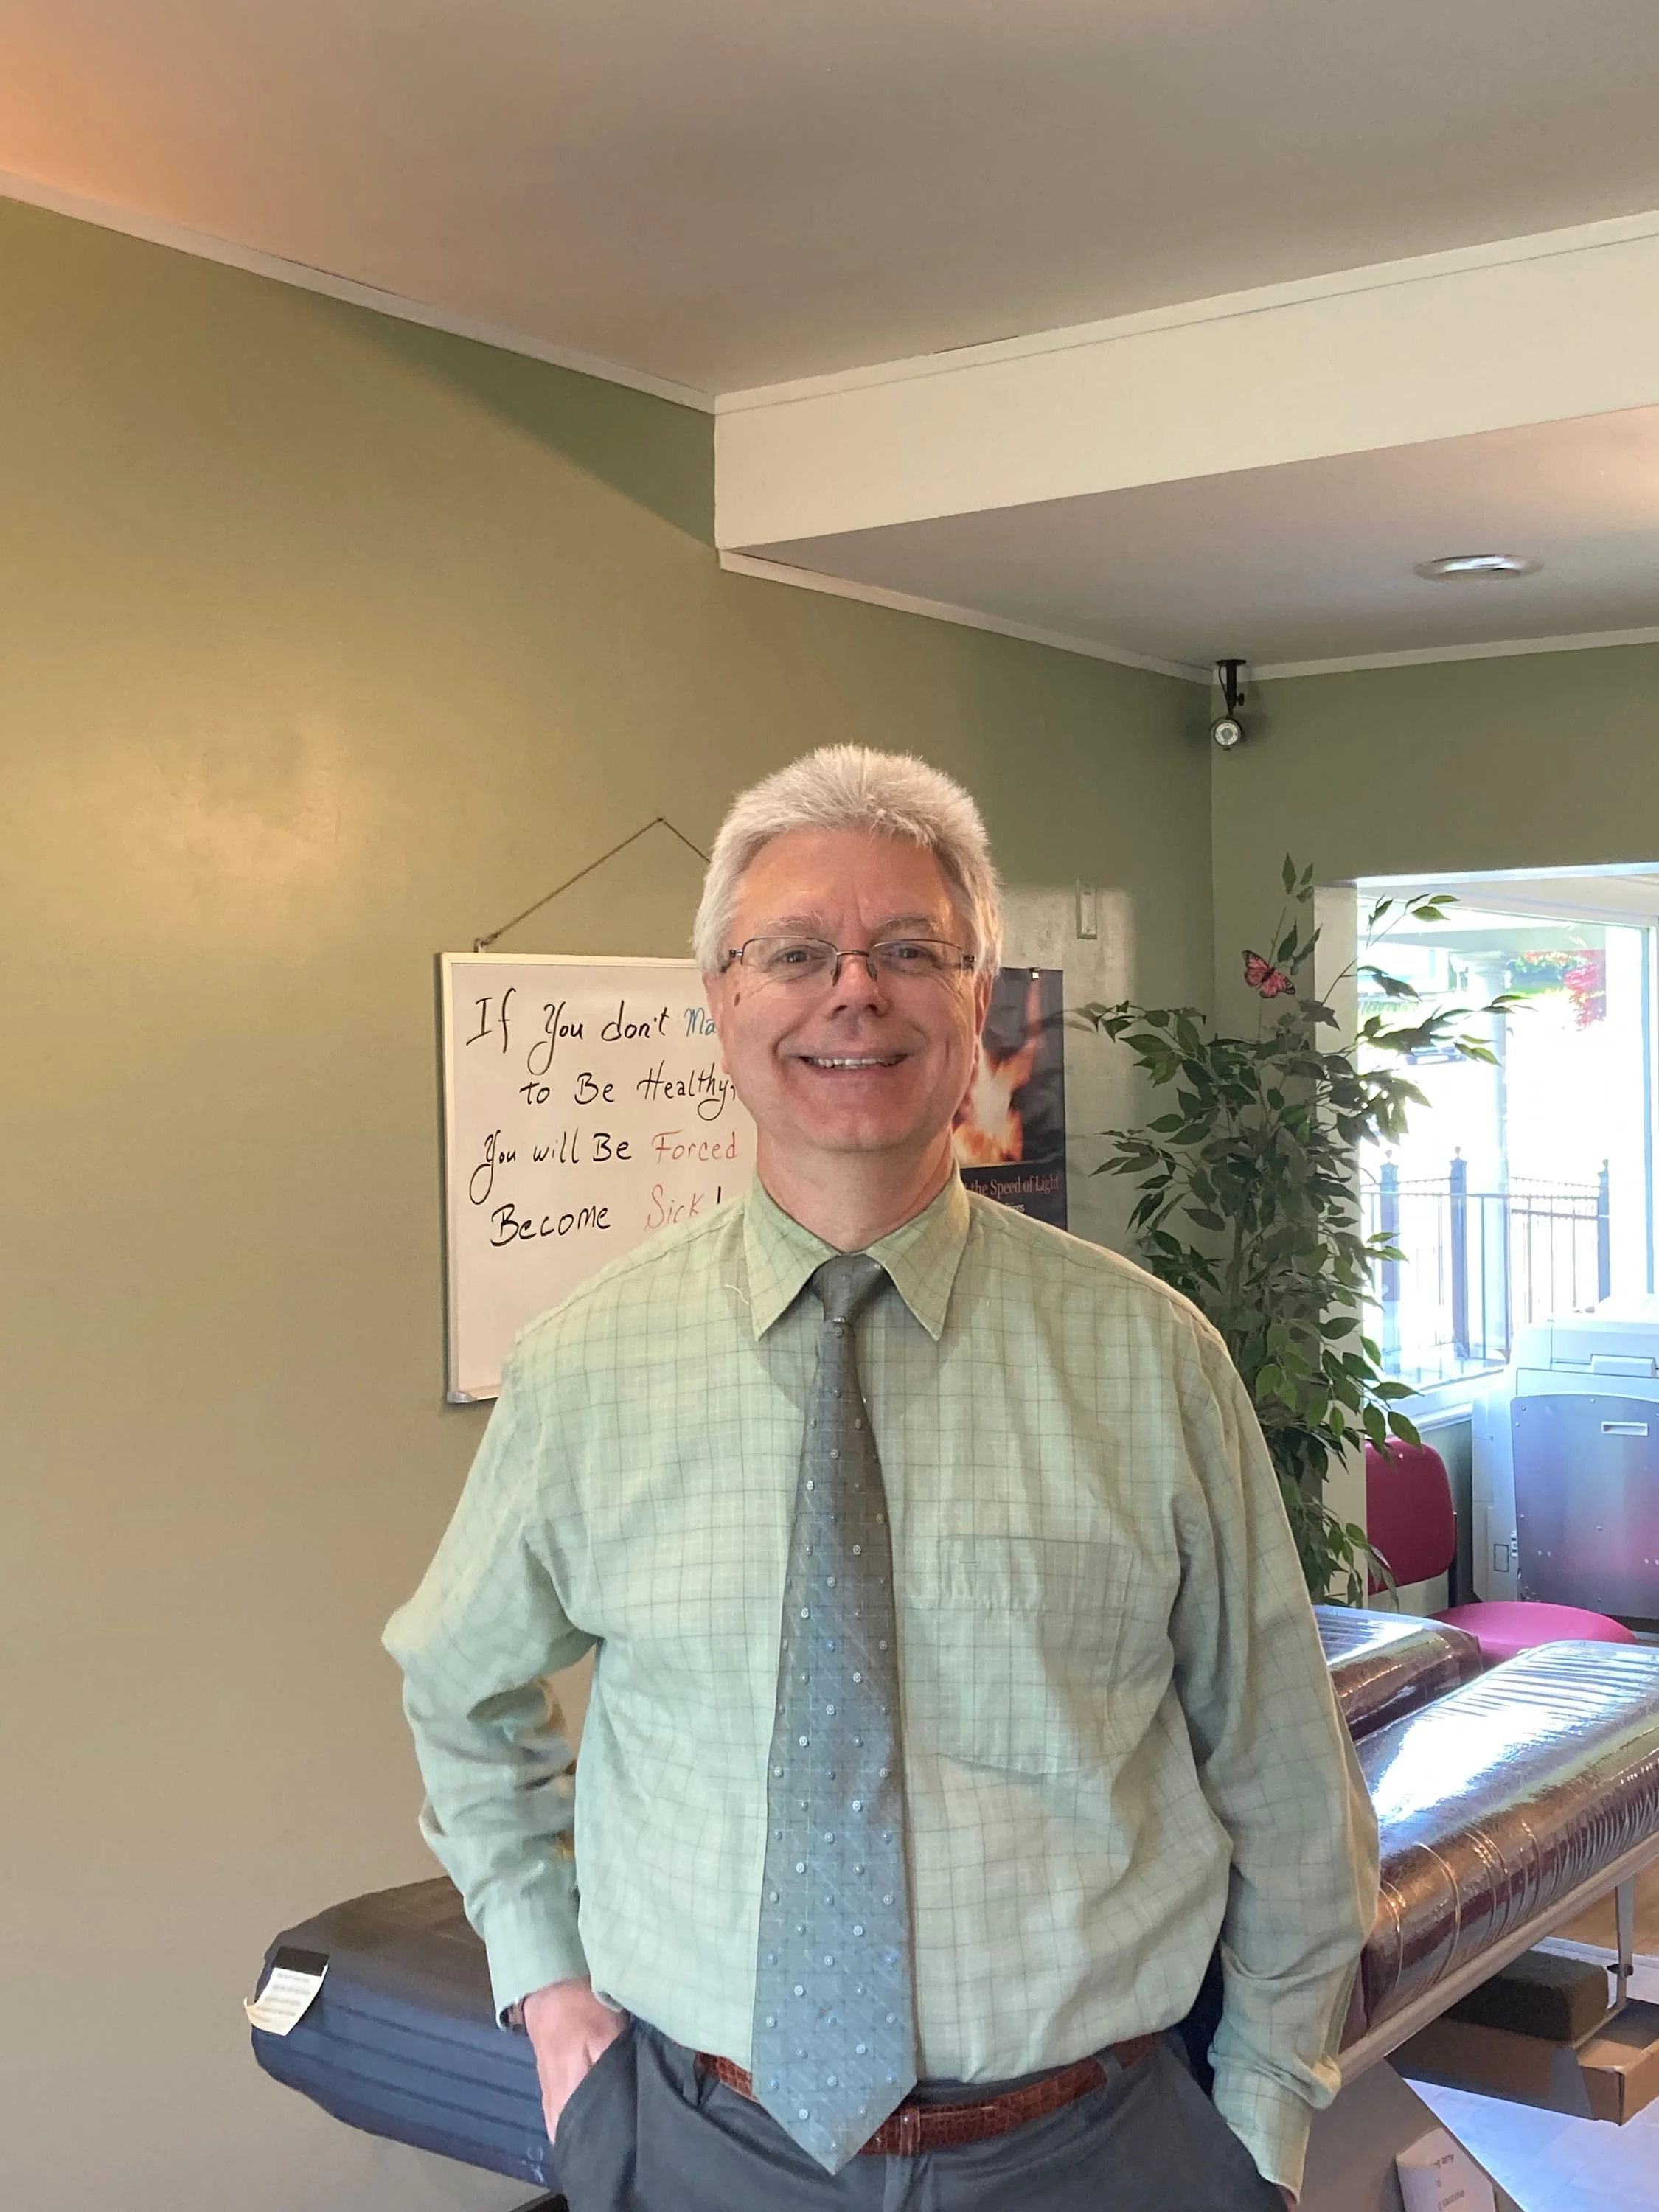 Dr. Kish smiles in his office.